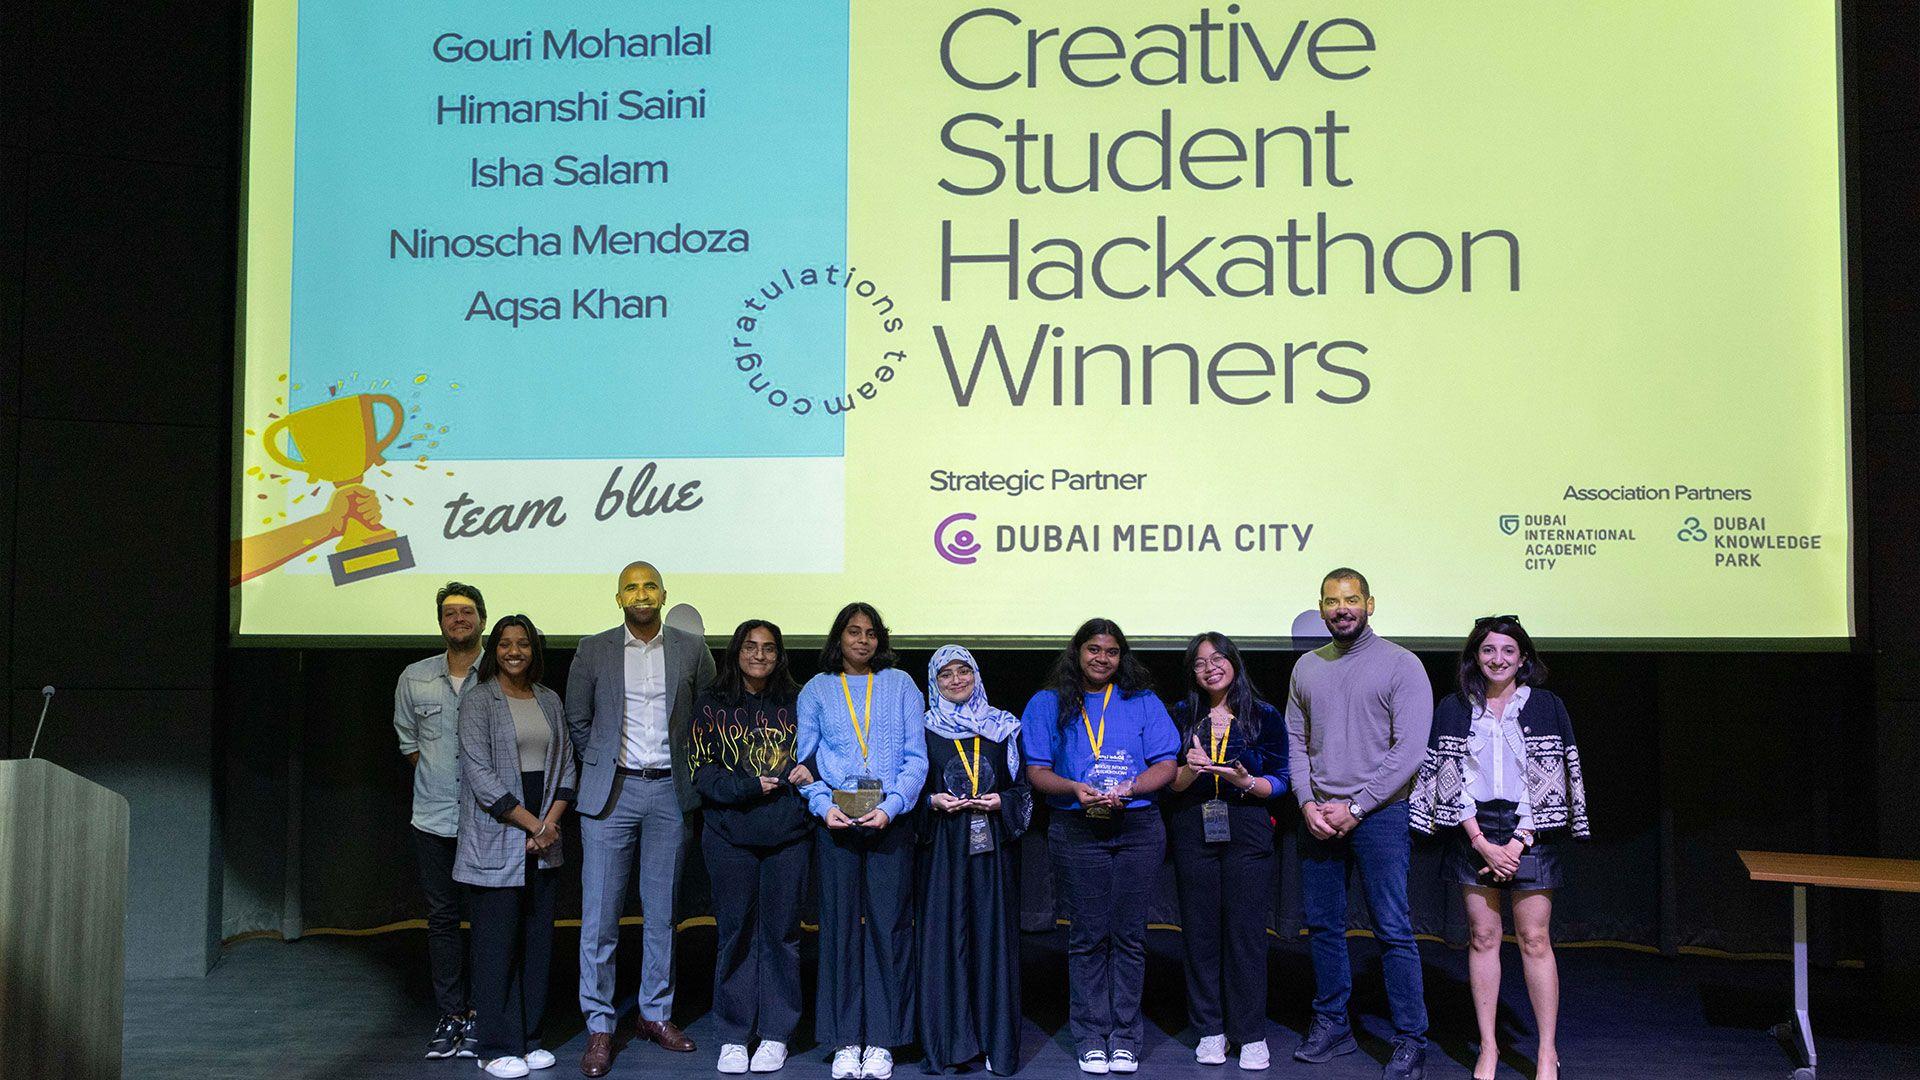 On 31 January and 1 February 2024, six Middlesex University Dubai students had the opportunity to participate in the 2024 Dubai Lynx Creative Student Hackathon, with two MDX students finishing in the winning team.